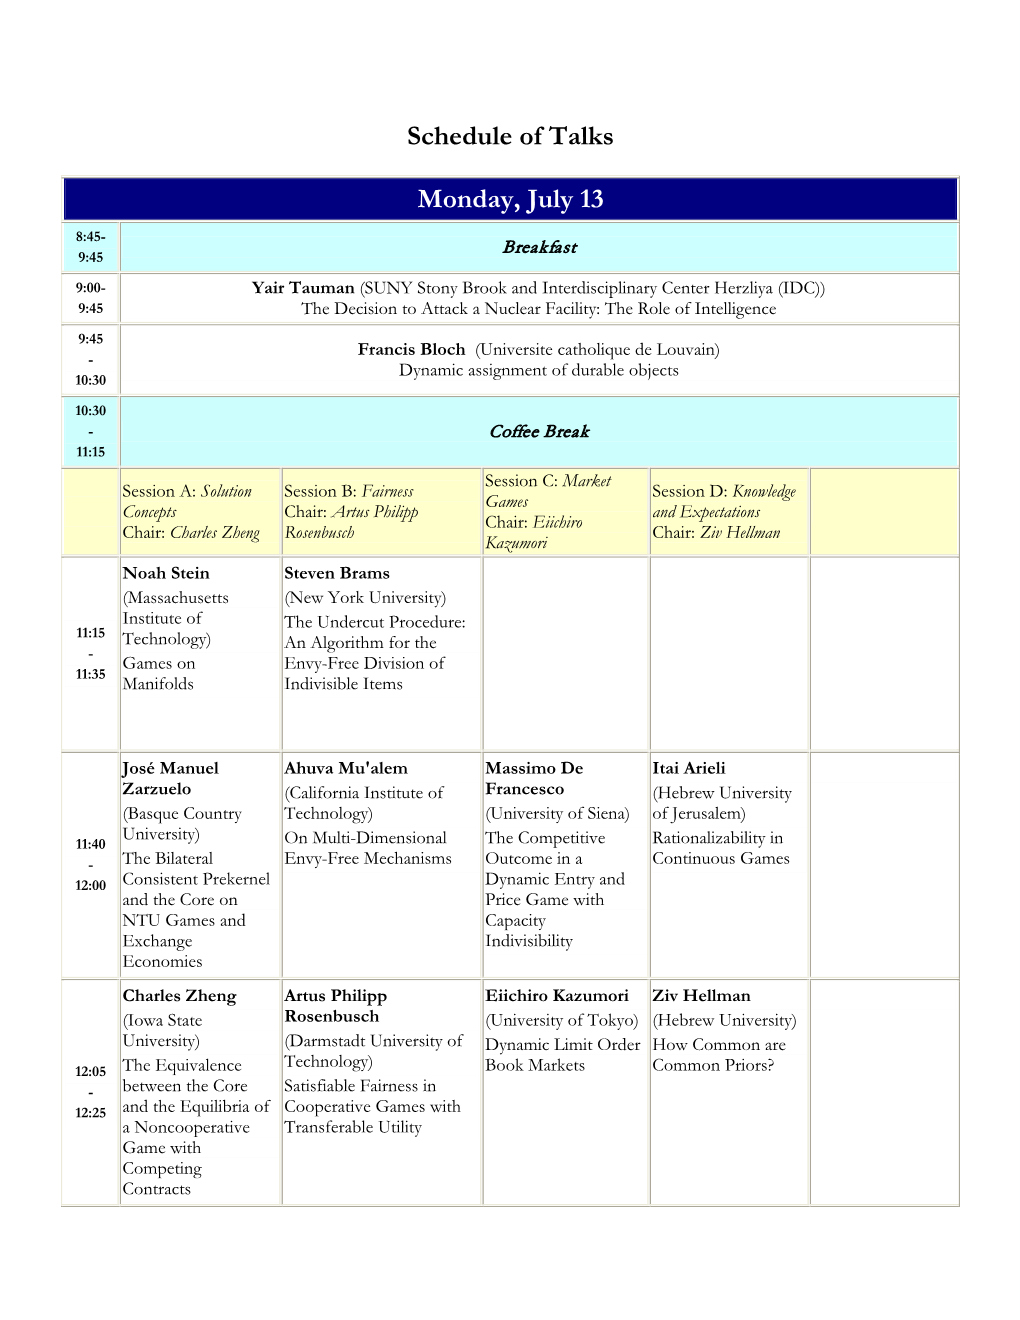 Schedule of Talks Monday, July 13